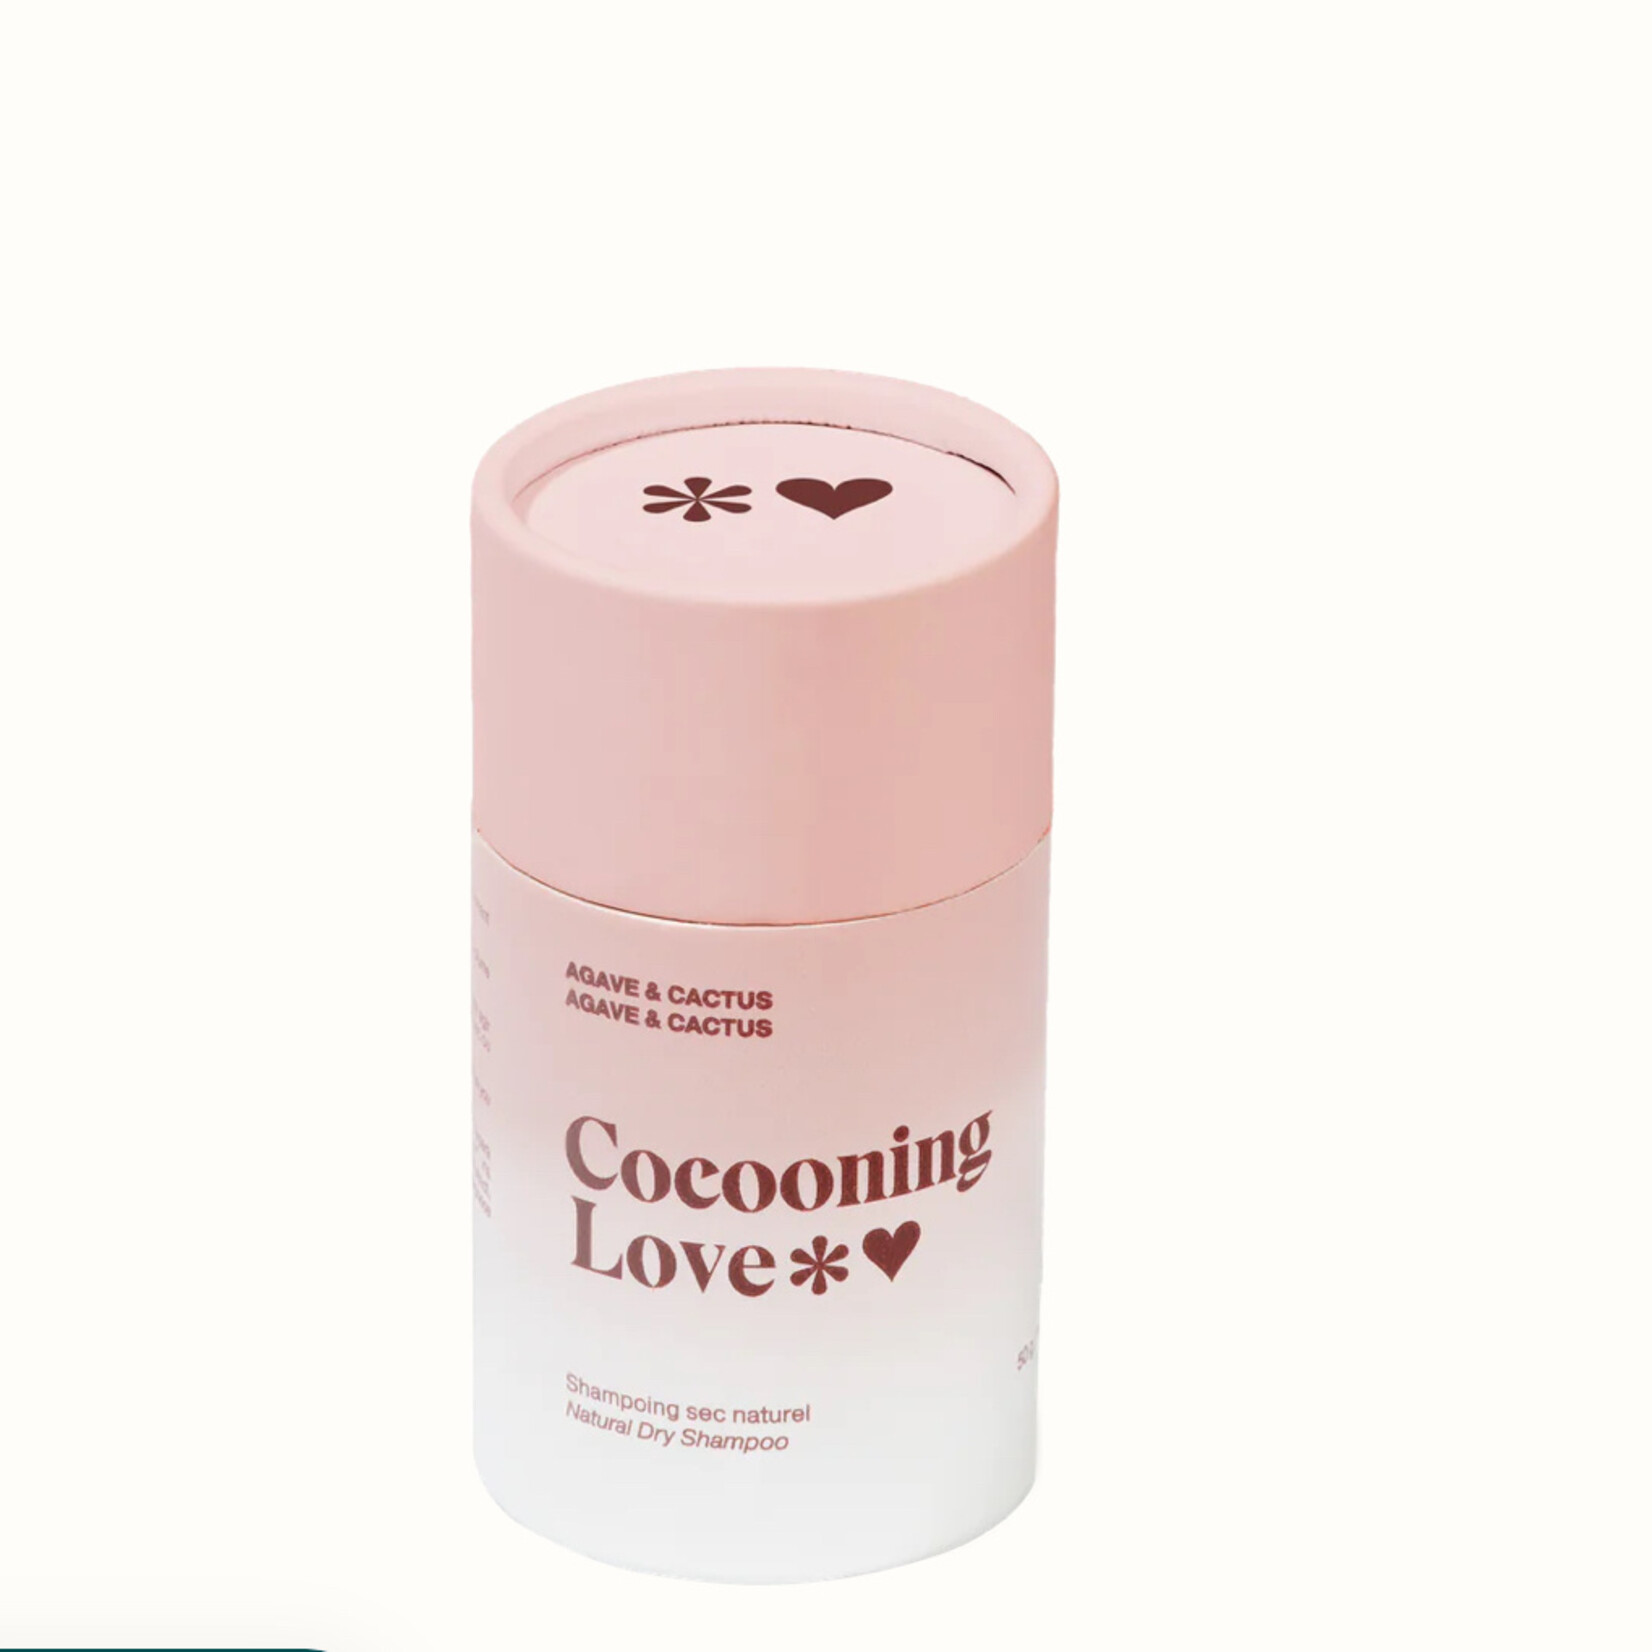 Cocooning Love Shampooing Sec-Agave Et Cactus